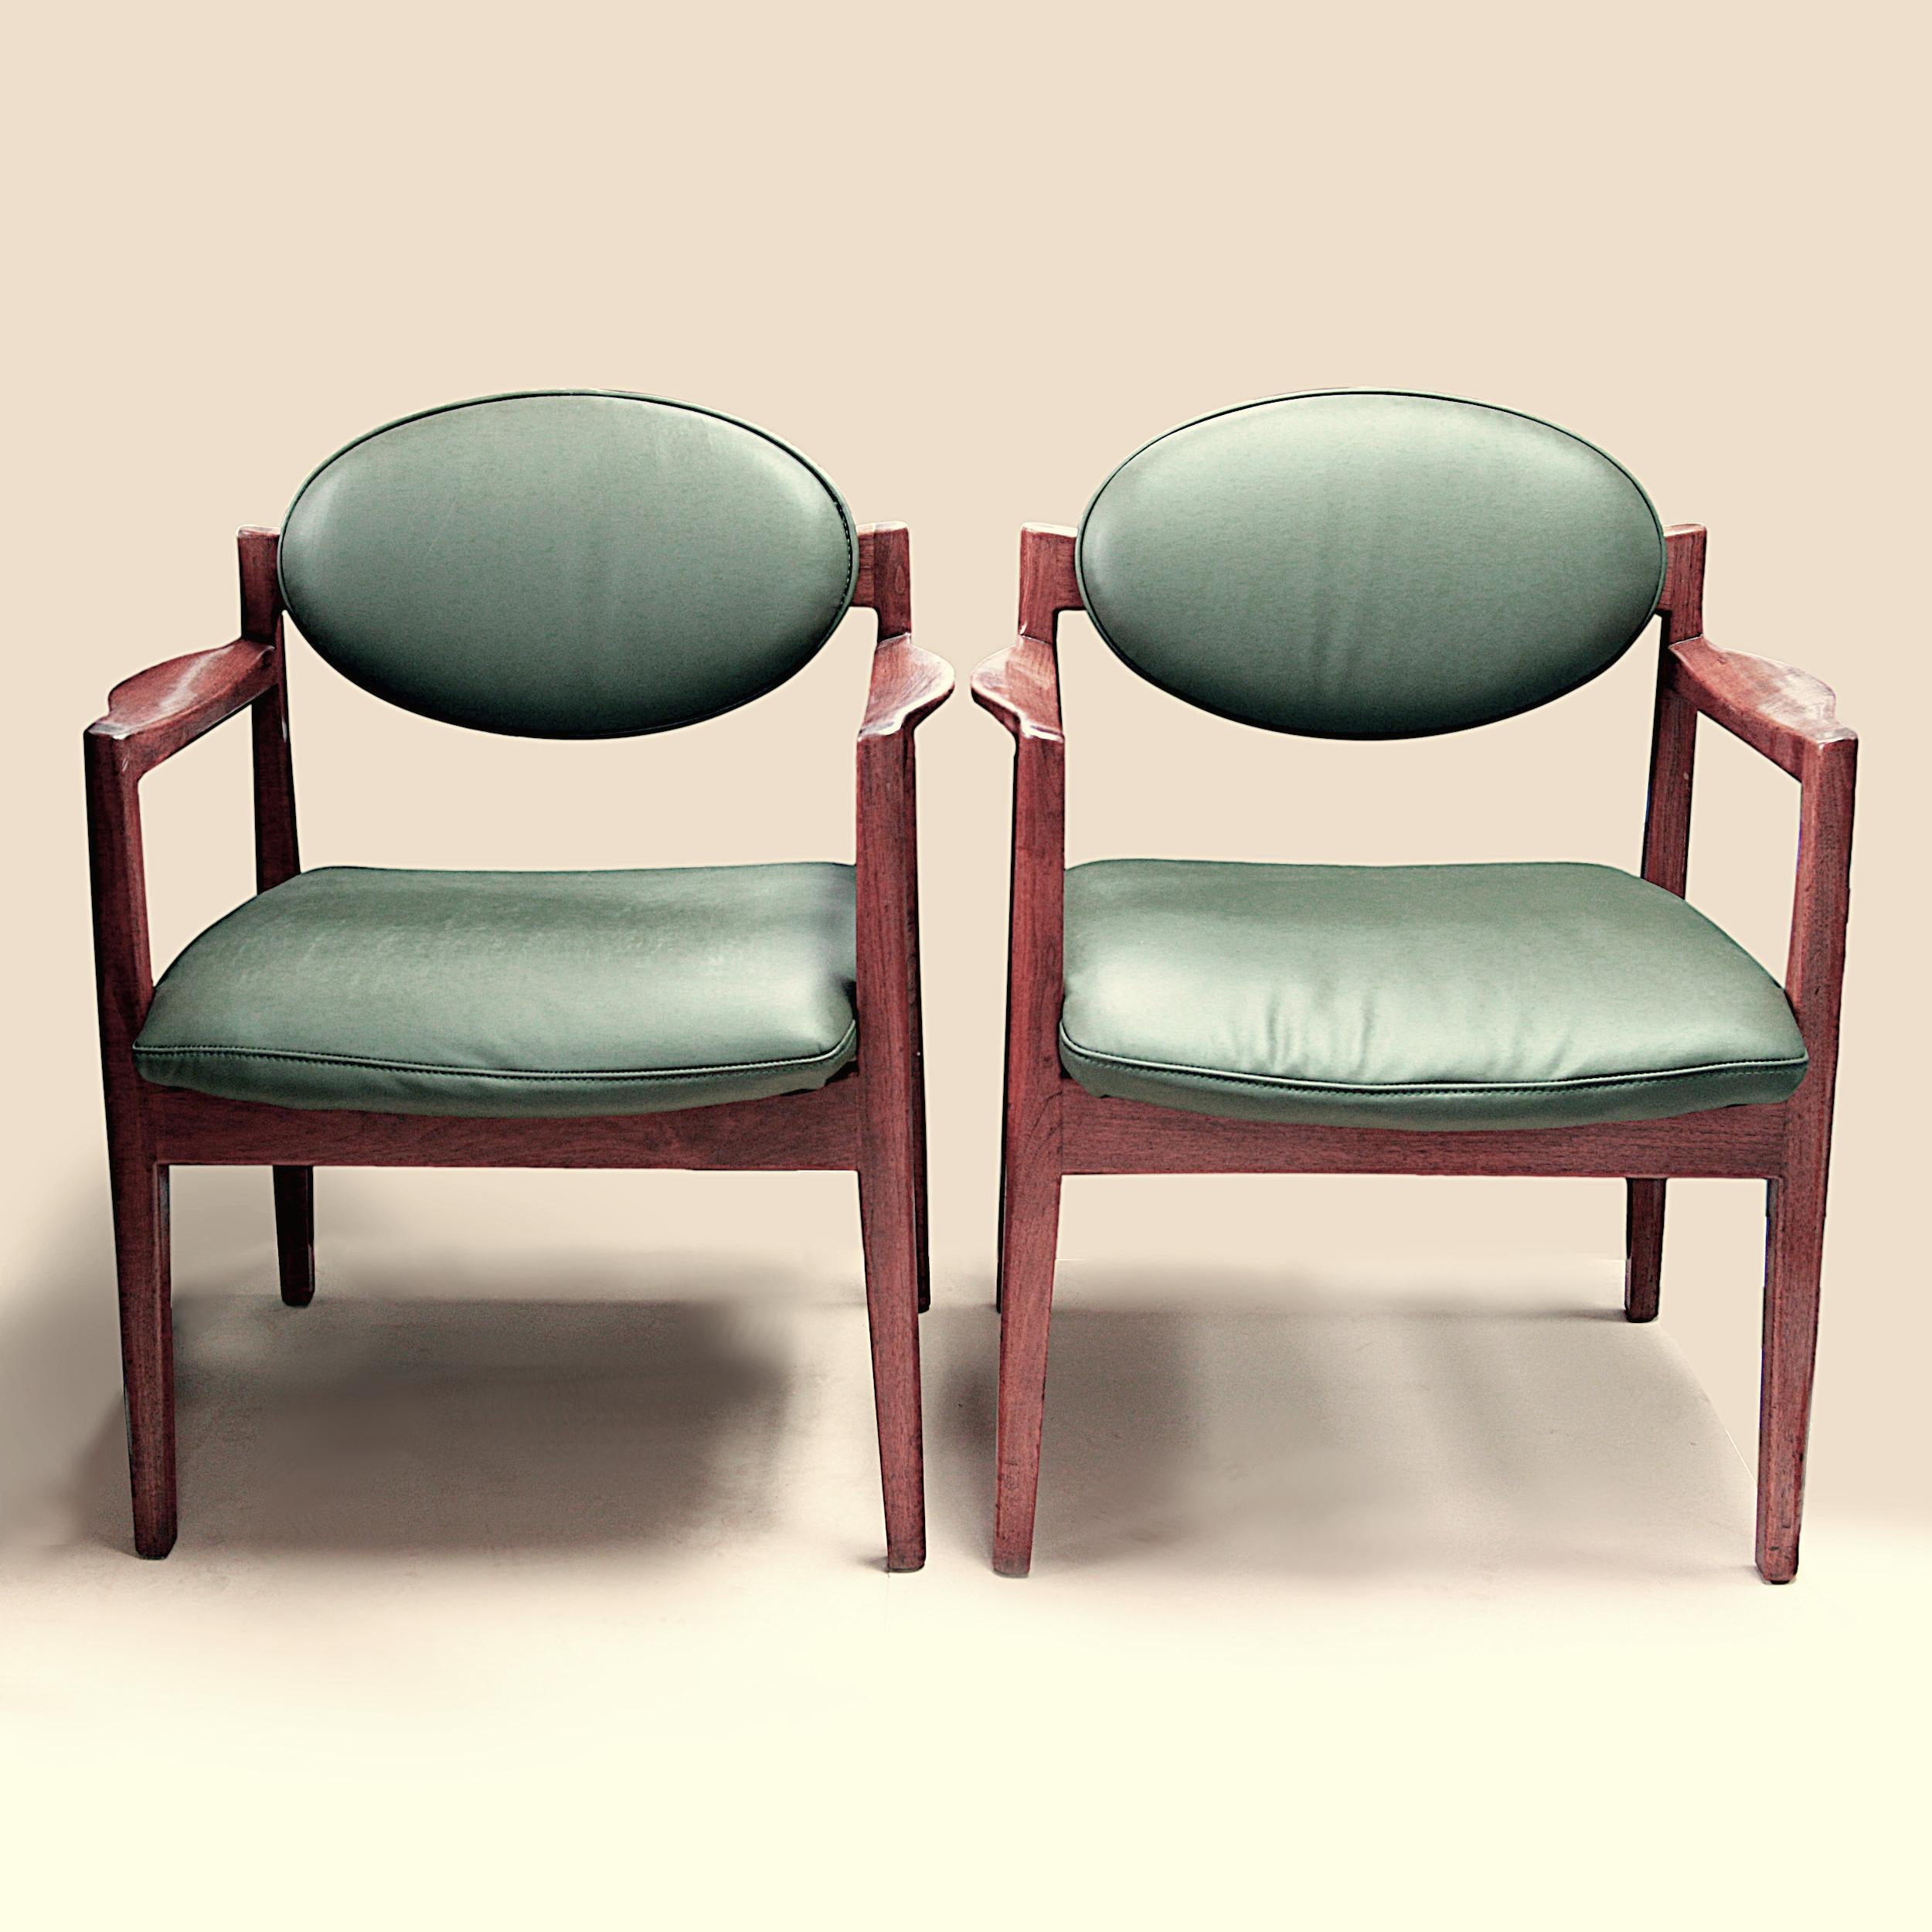 American Pair of Mid-Century Modern Green Leather Oval-Back Armchairs Chair by Jens Risom For Sale